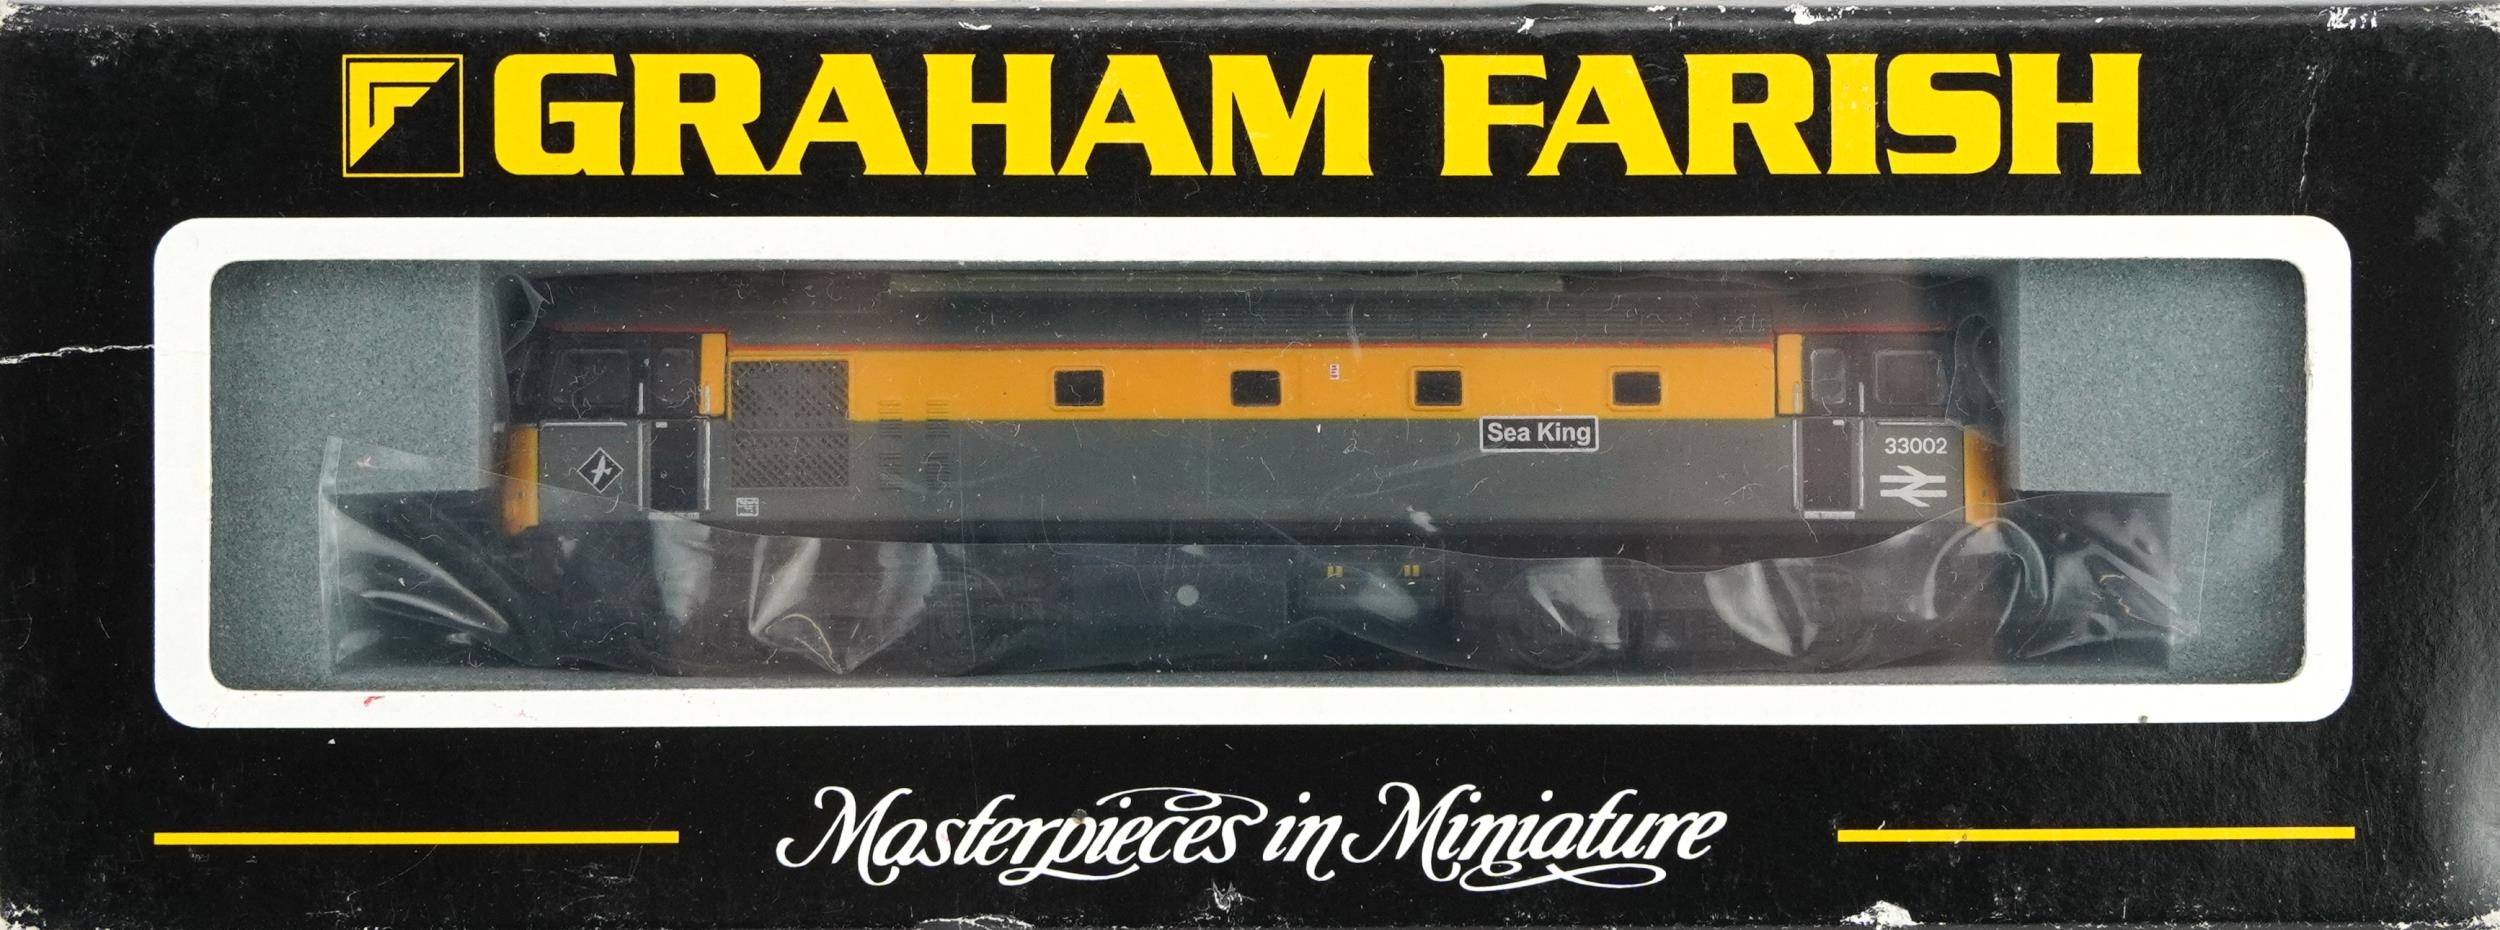 Two Graham Farish N gauge model railway locomotives with cases, numbers 371-105 and 371-130 - Image 3 of 3